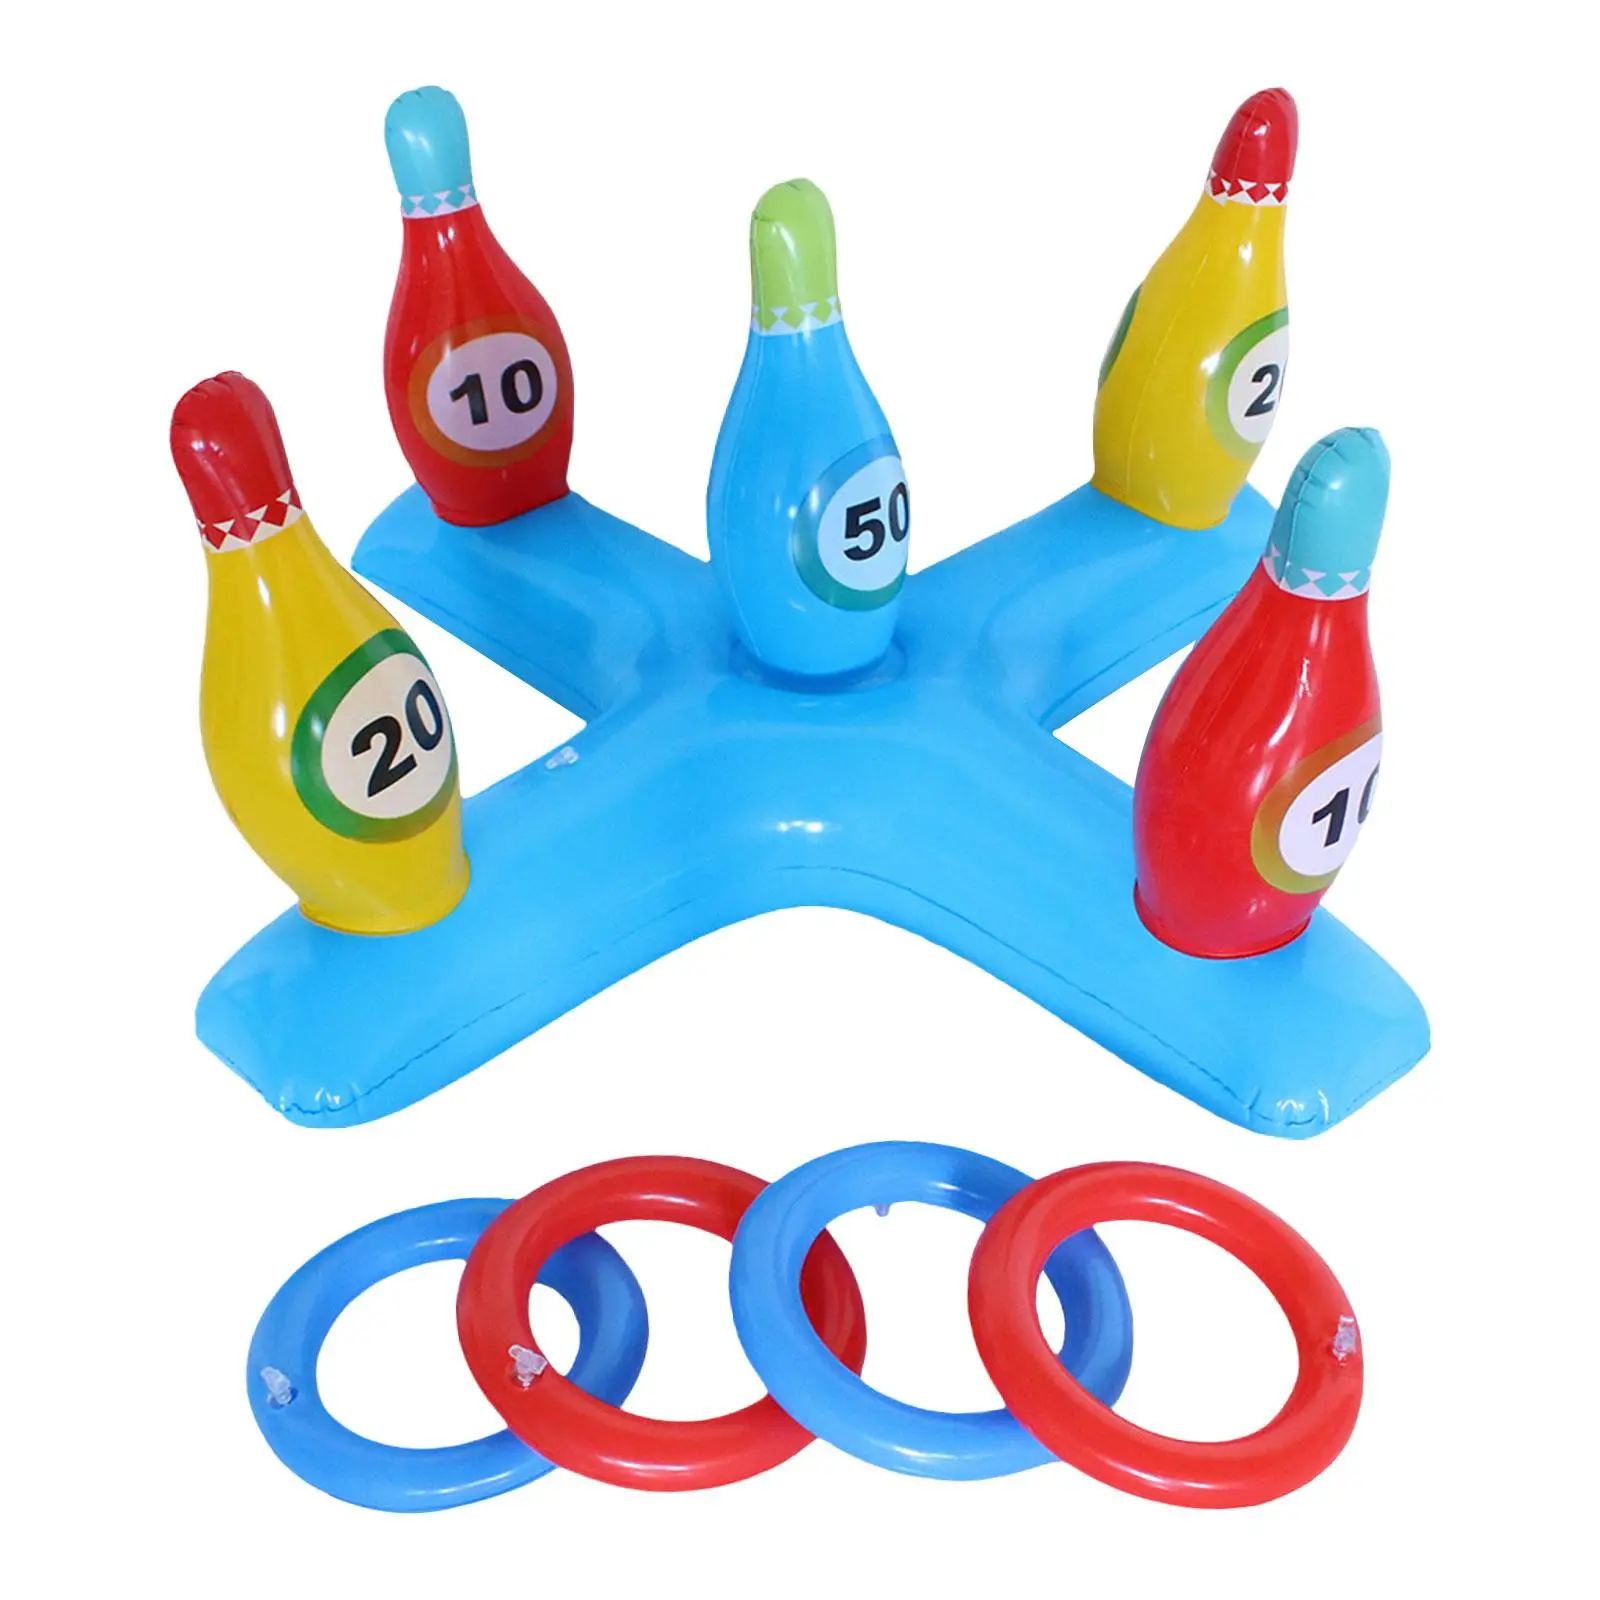 Ring Toss Game Set Team Cooperation Inflatable Bowling Set Carnival Outdoor Games for Games Xmas Activity Backyard Birthday